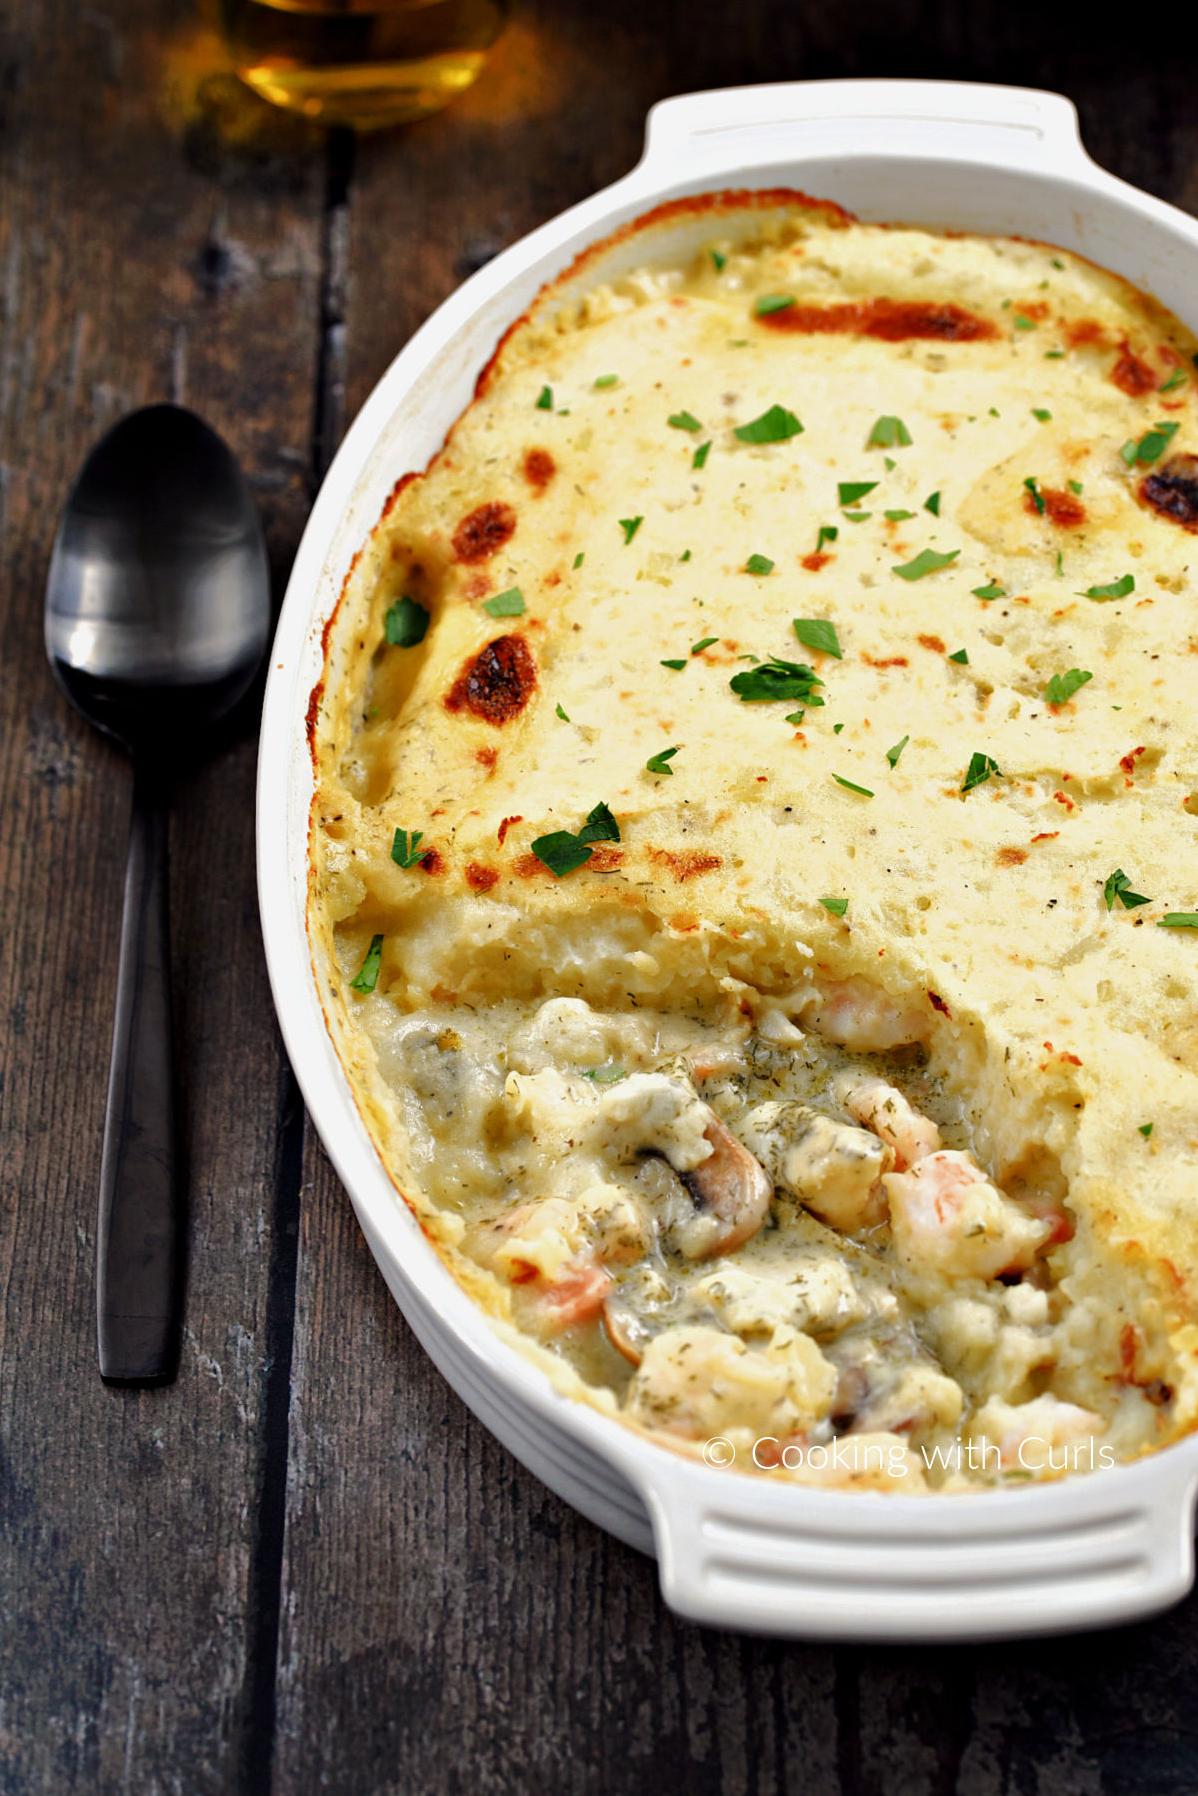  Creamy, savory, and utterly delicious